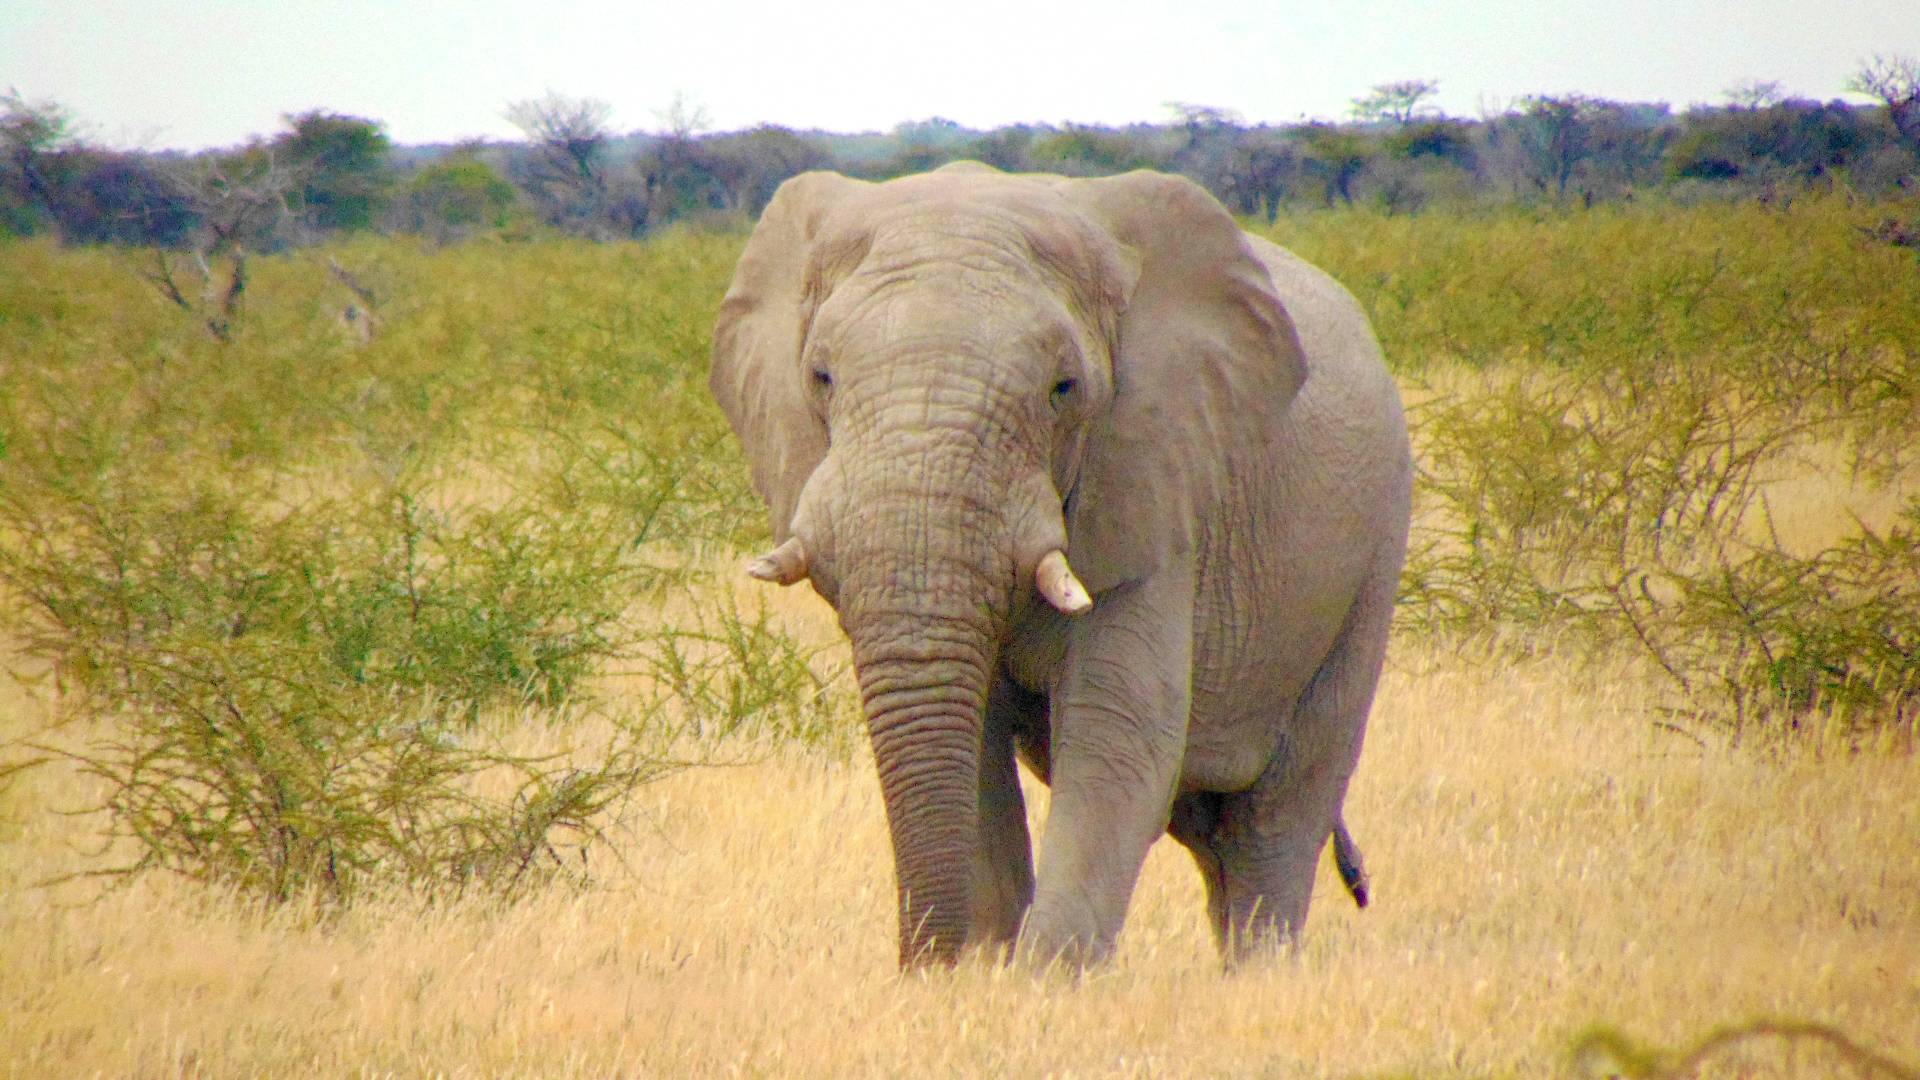 Elephant standing in tall grasses